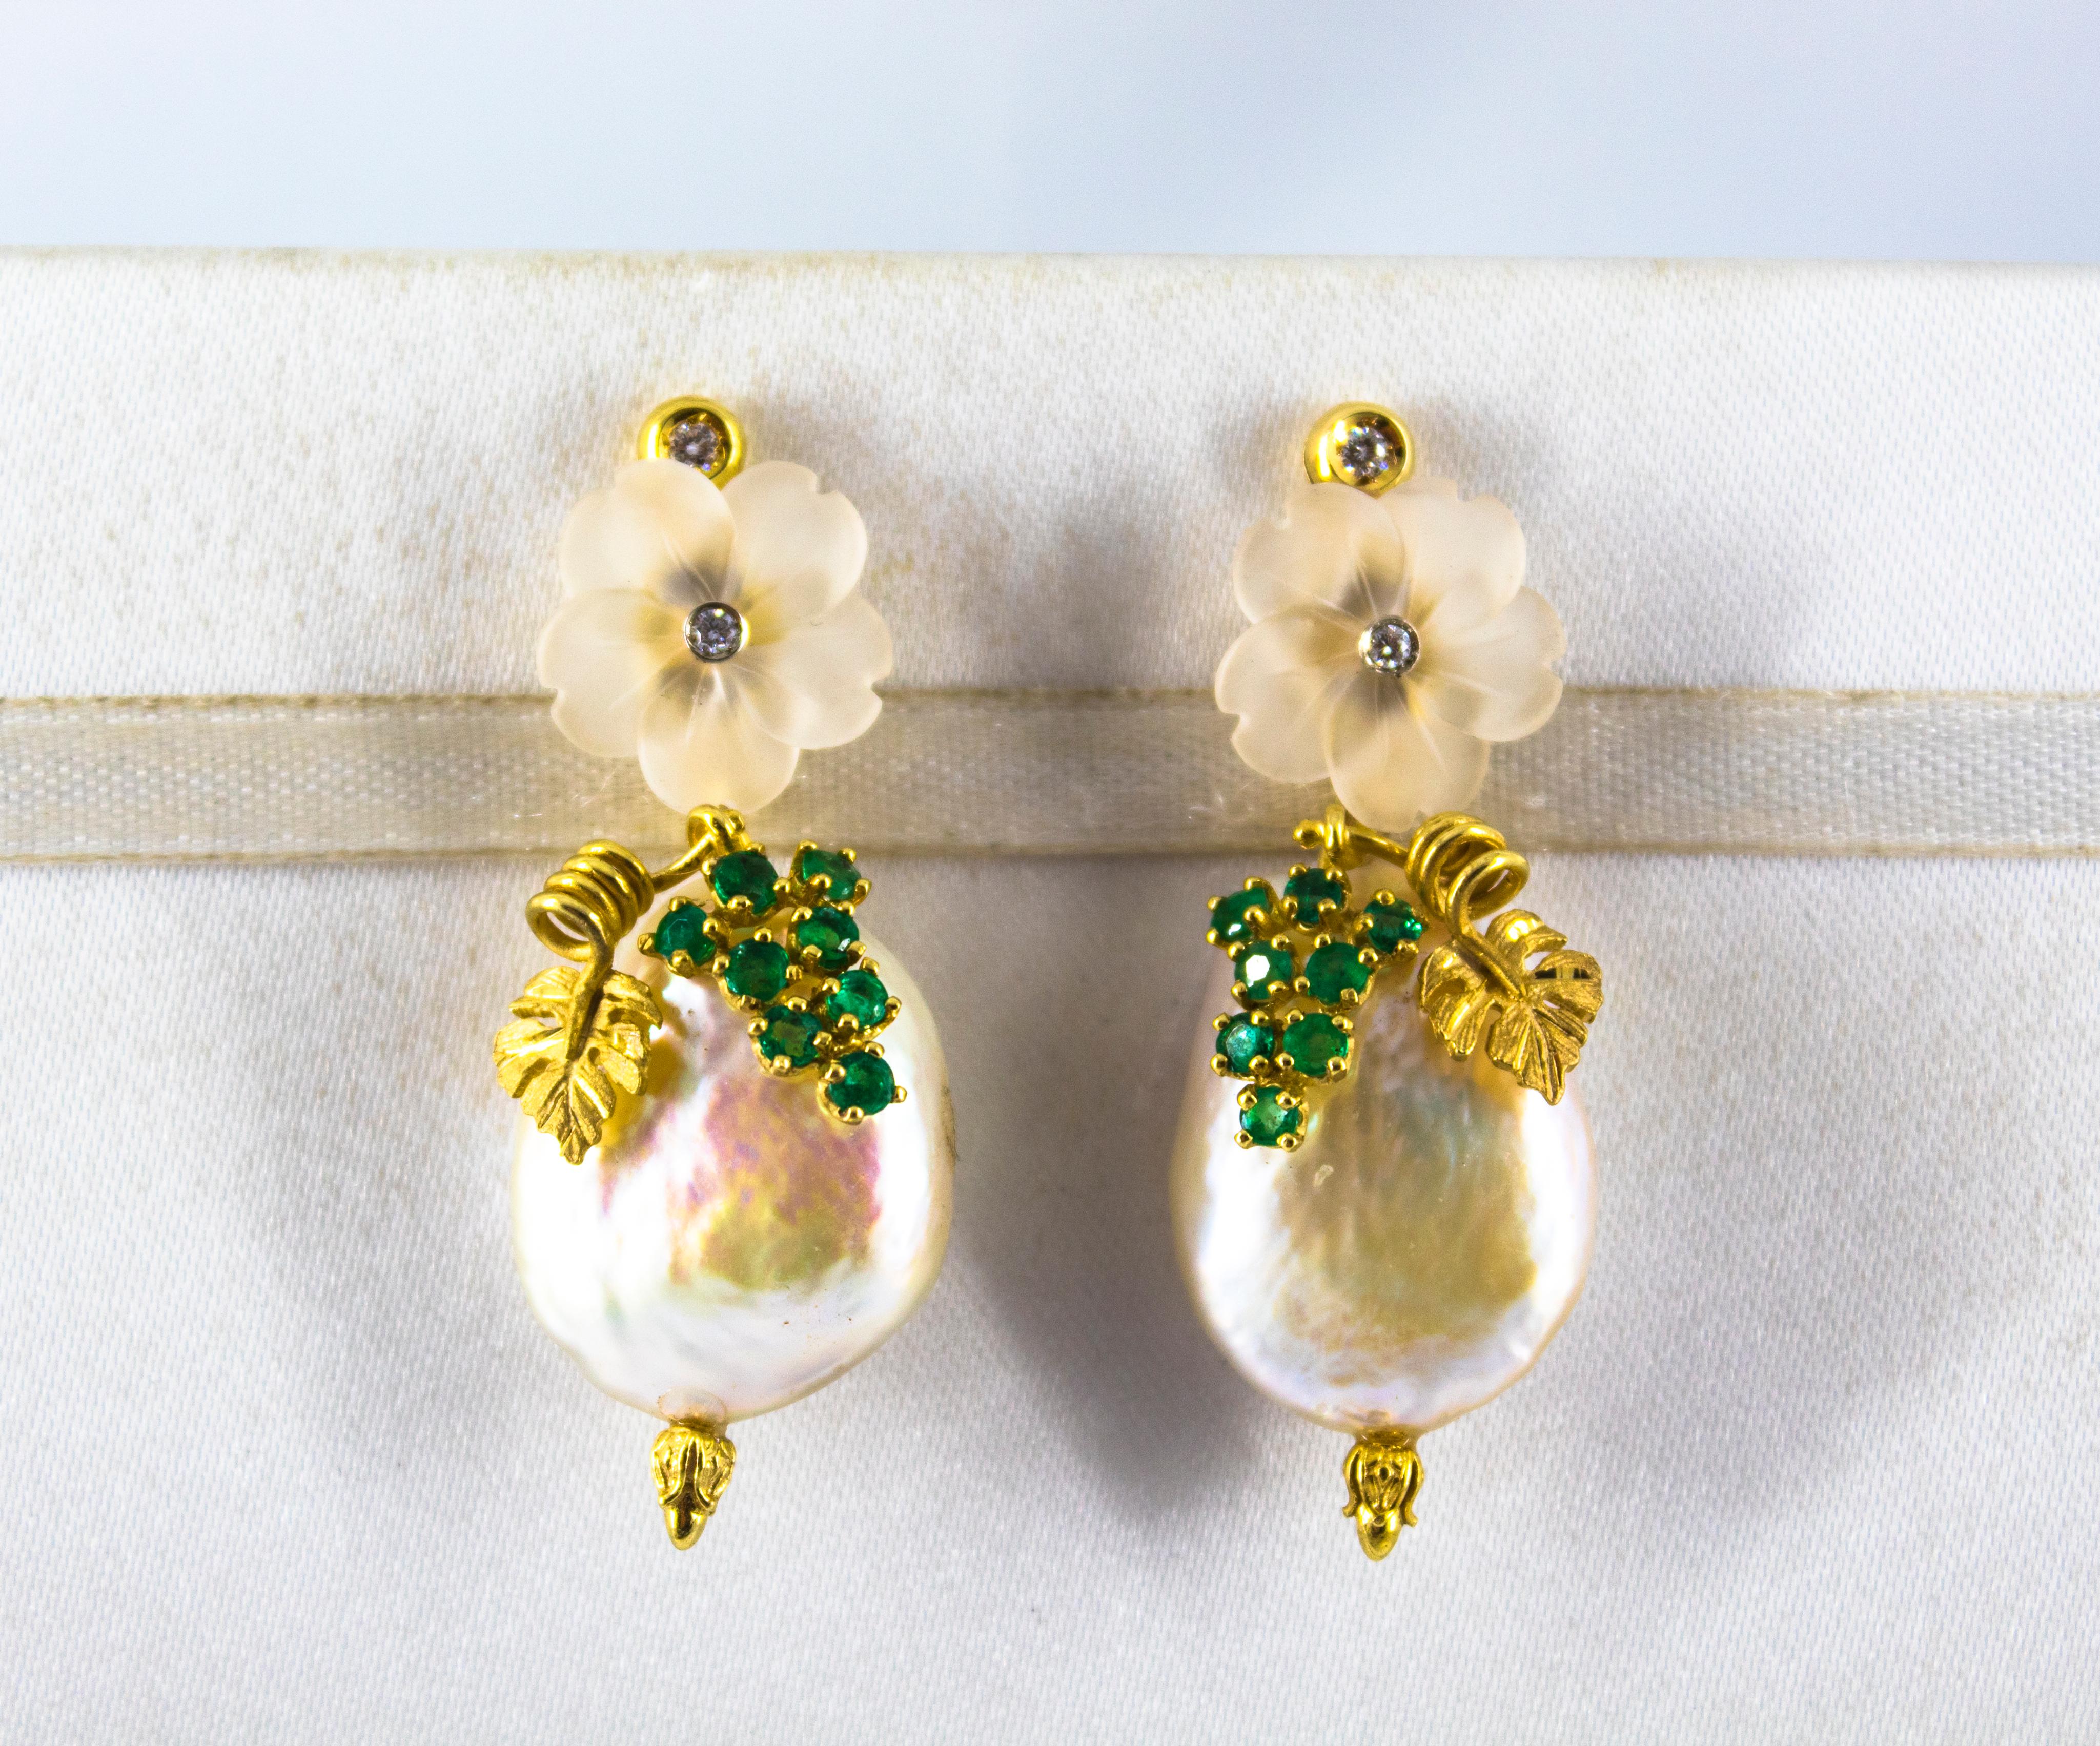 These Stud Earrings are made of 14K Yellow Gold.
These Earrings have 0.12 Carats of White Brilliant Cut Diamonds.
These Earrings have 0.90 Carats of Emeralds.
These Earrings have also Pearls and Rock Crystal.

These Earrings are available also with